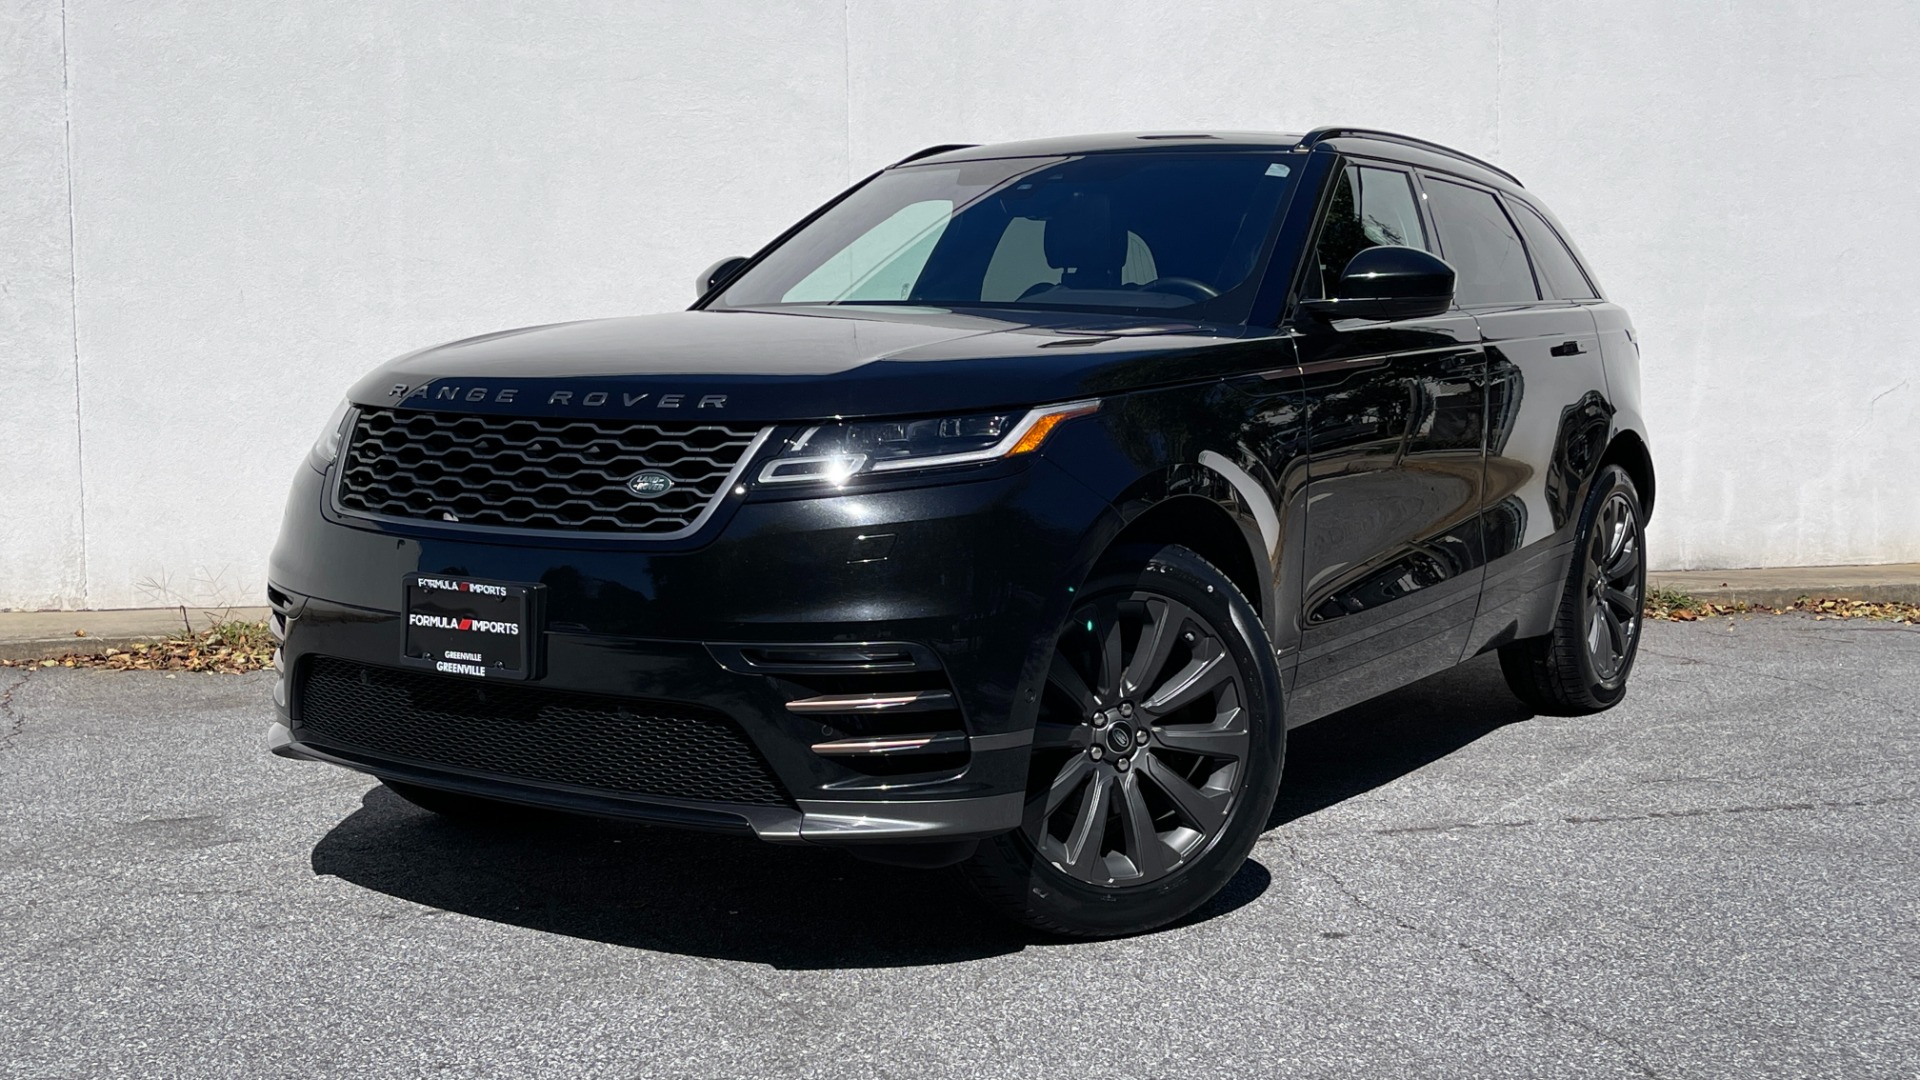 Used 2018 Land Rover Range Rover Velar R-Dynamic SE / POWER PRO / HEATED SEATS / REAR CONVENIENCE for sale $41,200 at Formula Imports in Charlotte NC 28227 1